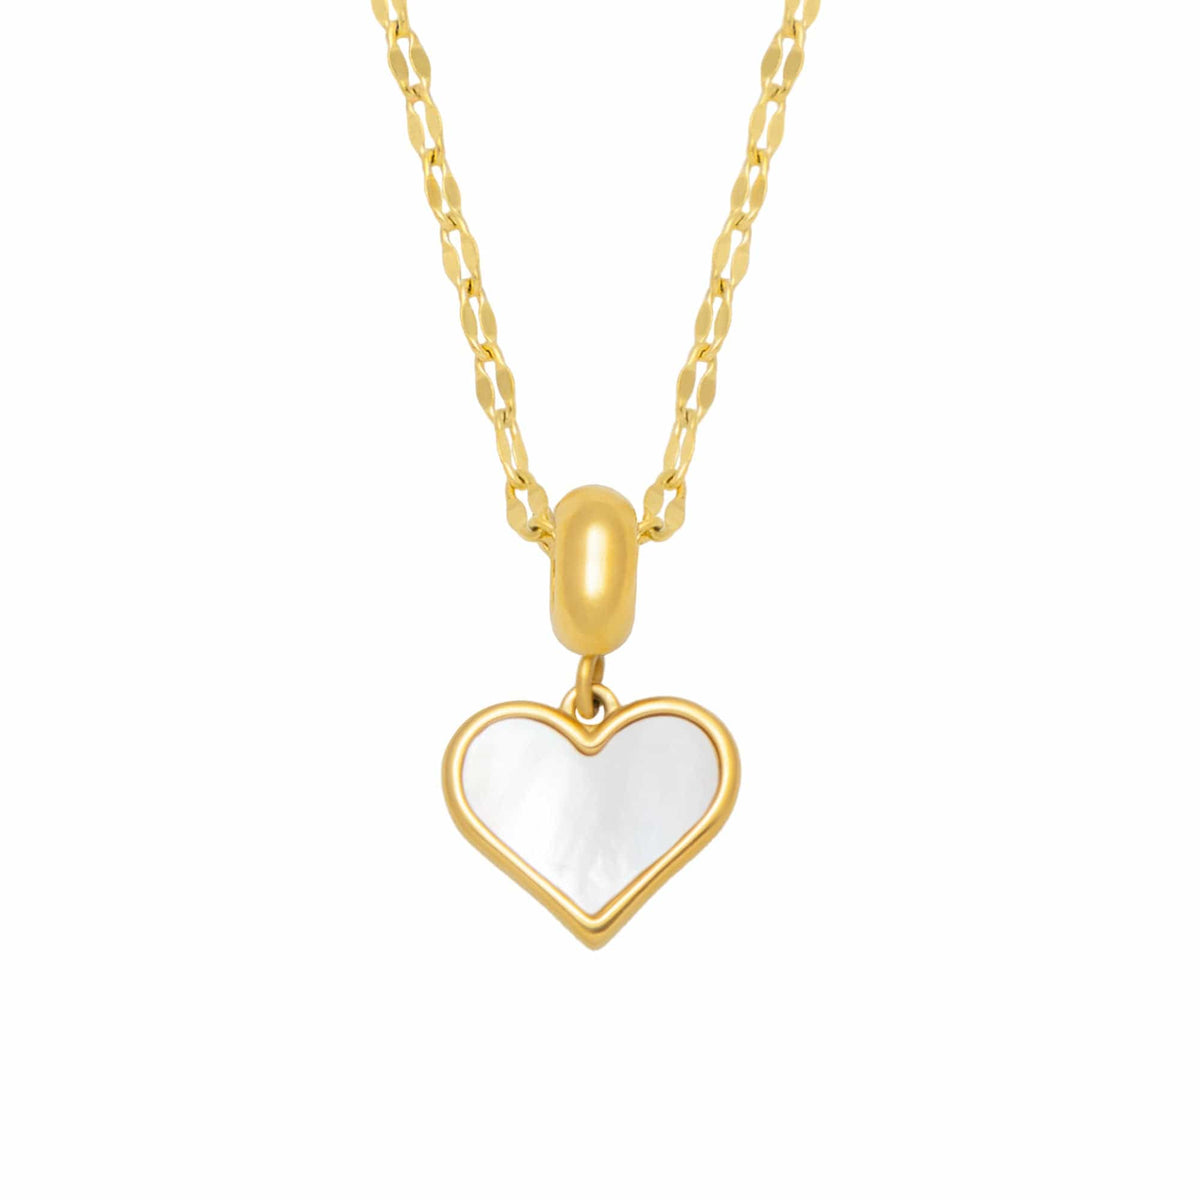 BohoMoon Stainless Steel Endless Love Necklace Gold